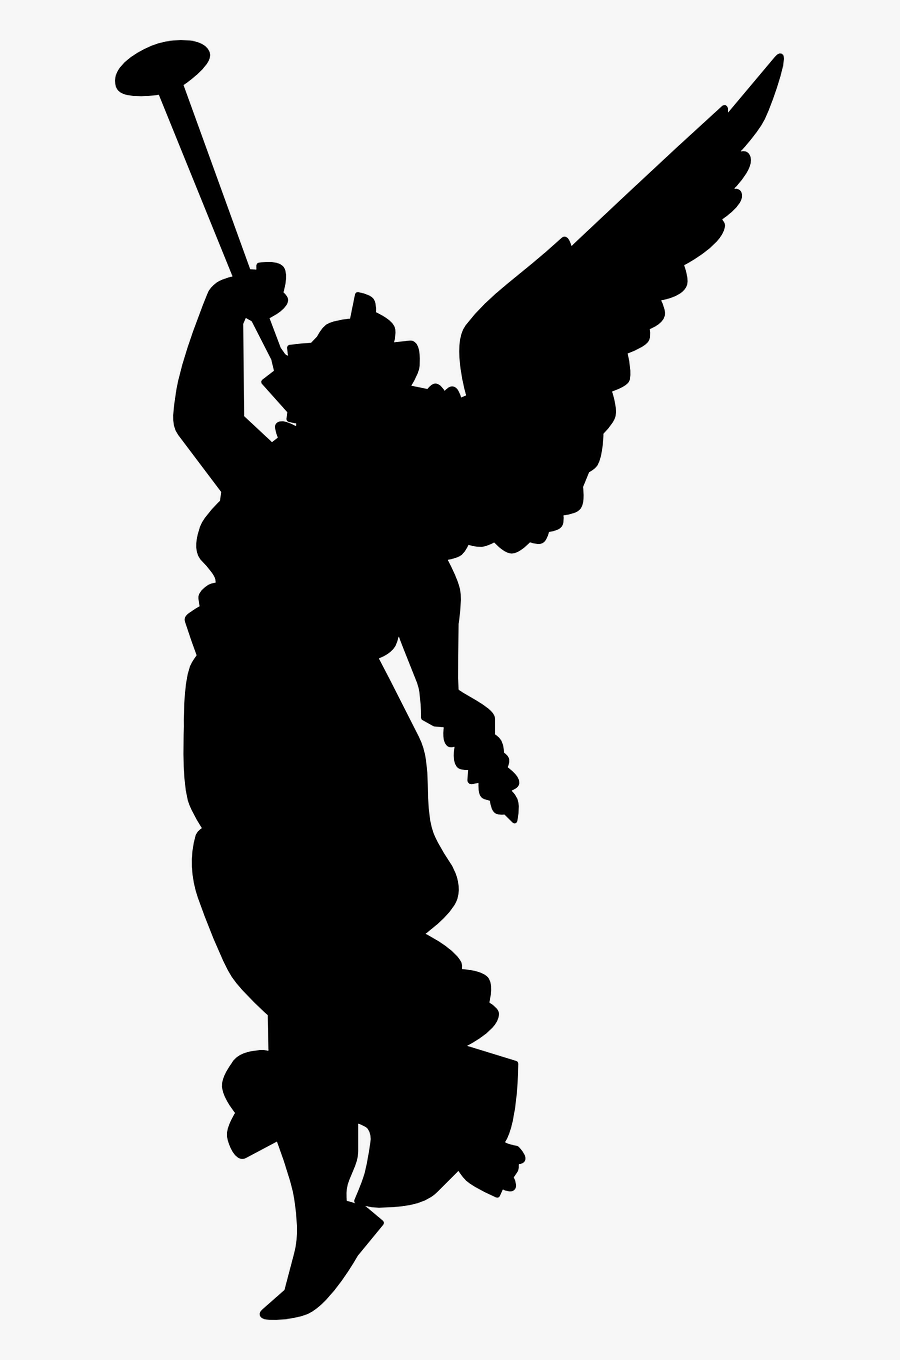 https://www.clipartkey.com/mpngs/m/29-298393_christmas-angels-clipart-black-and-white-angel-announcing.png